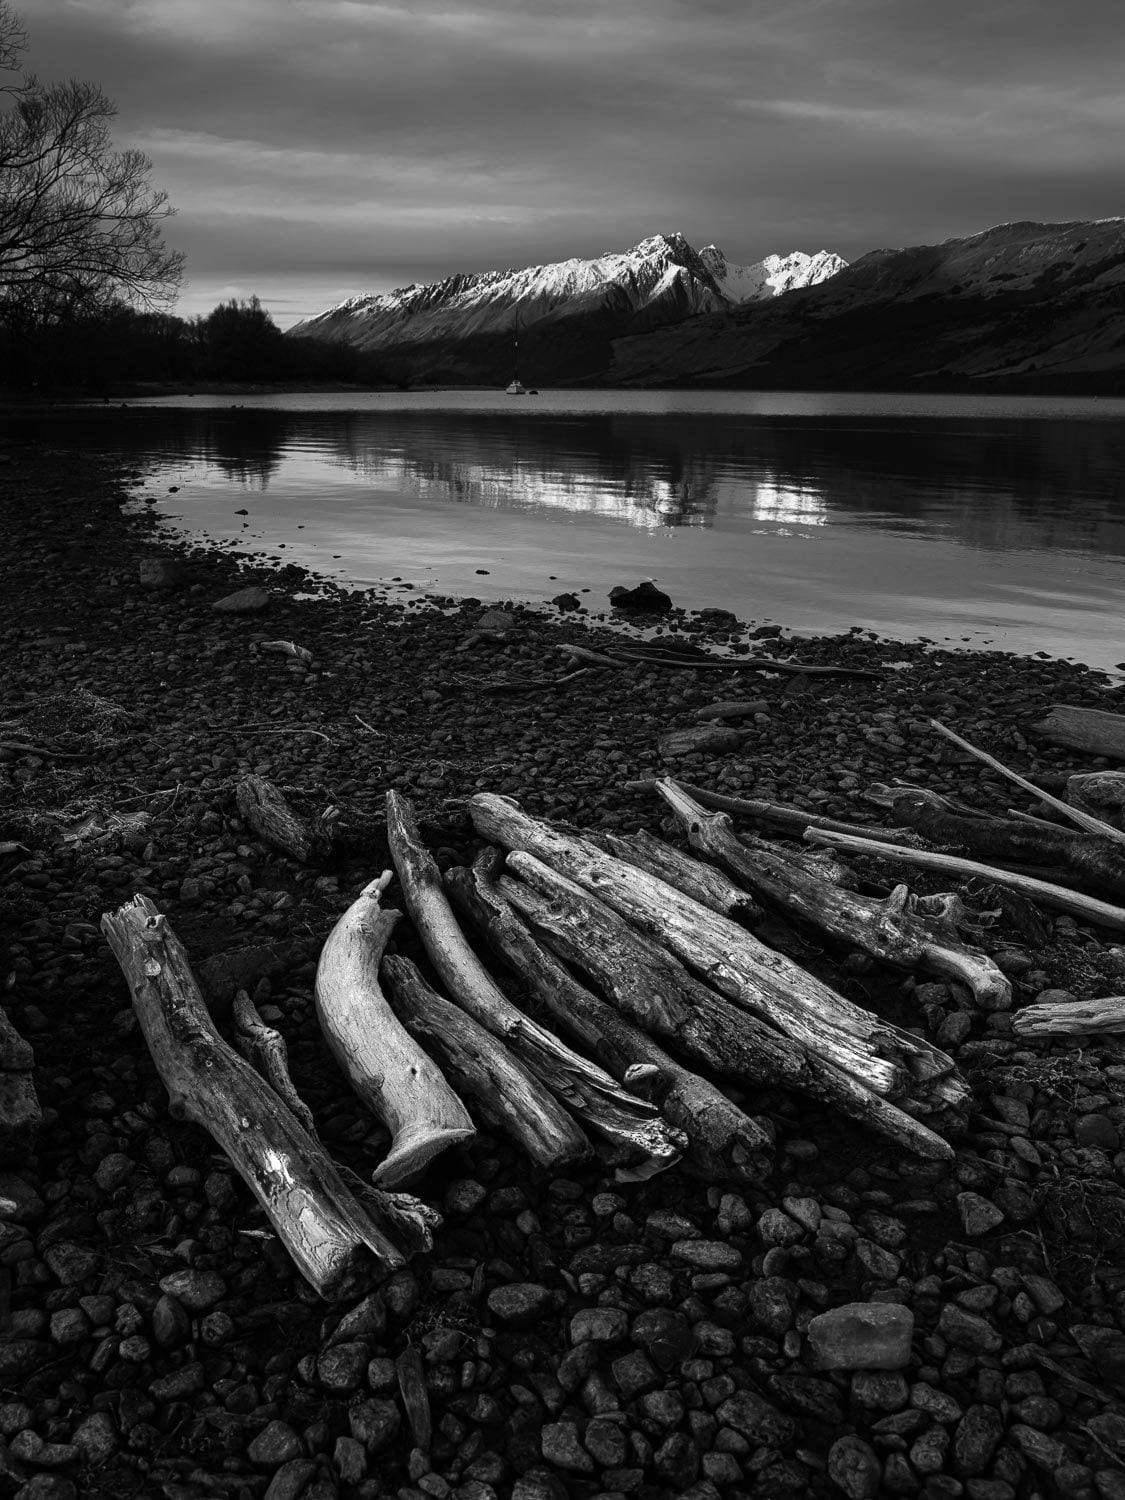 Dark view of a lake, some long wood pillar, and a mountain wall in the background, Glenorchy Shoreline - New Zealand